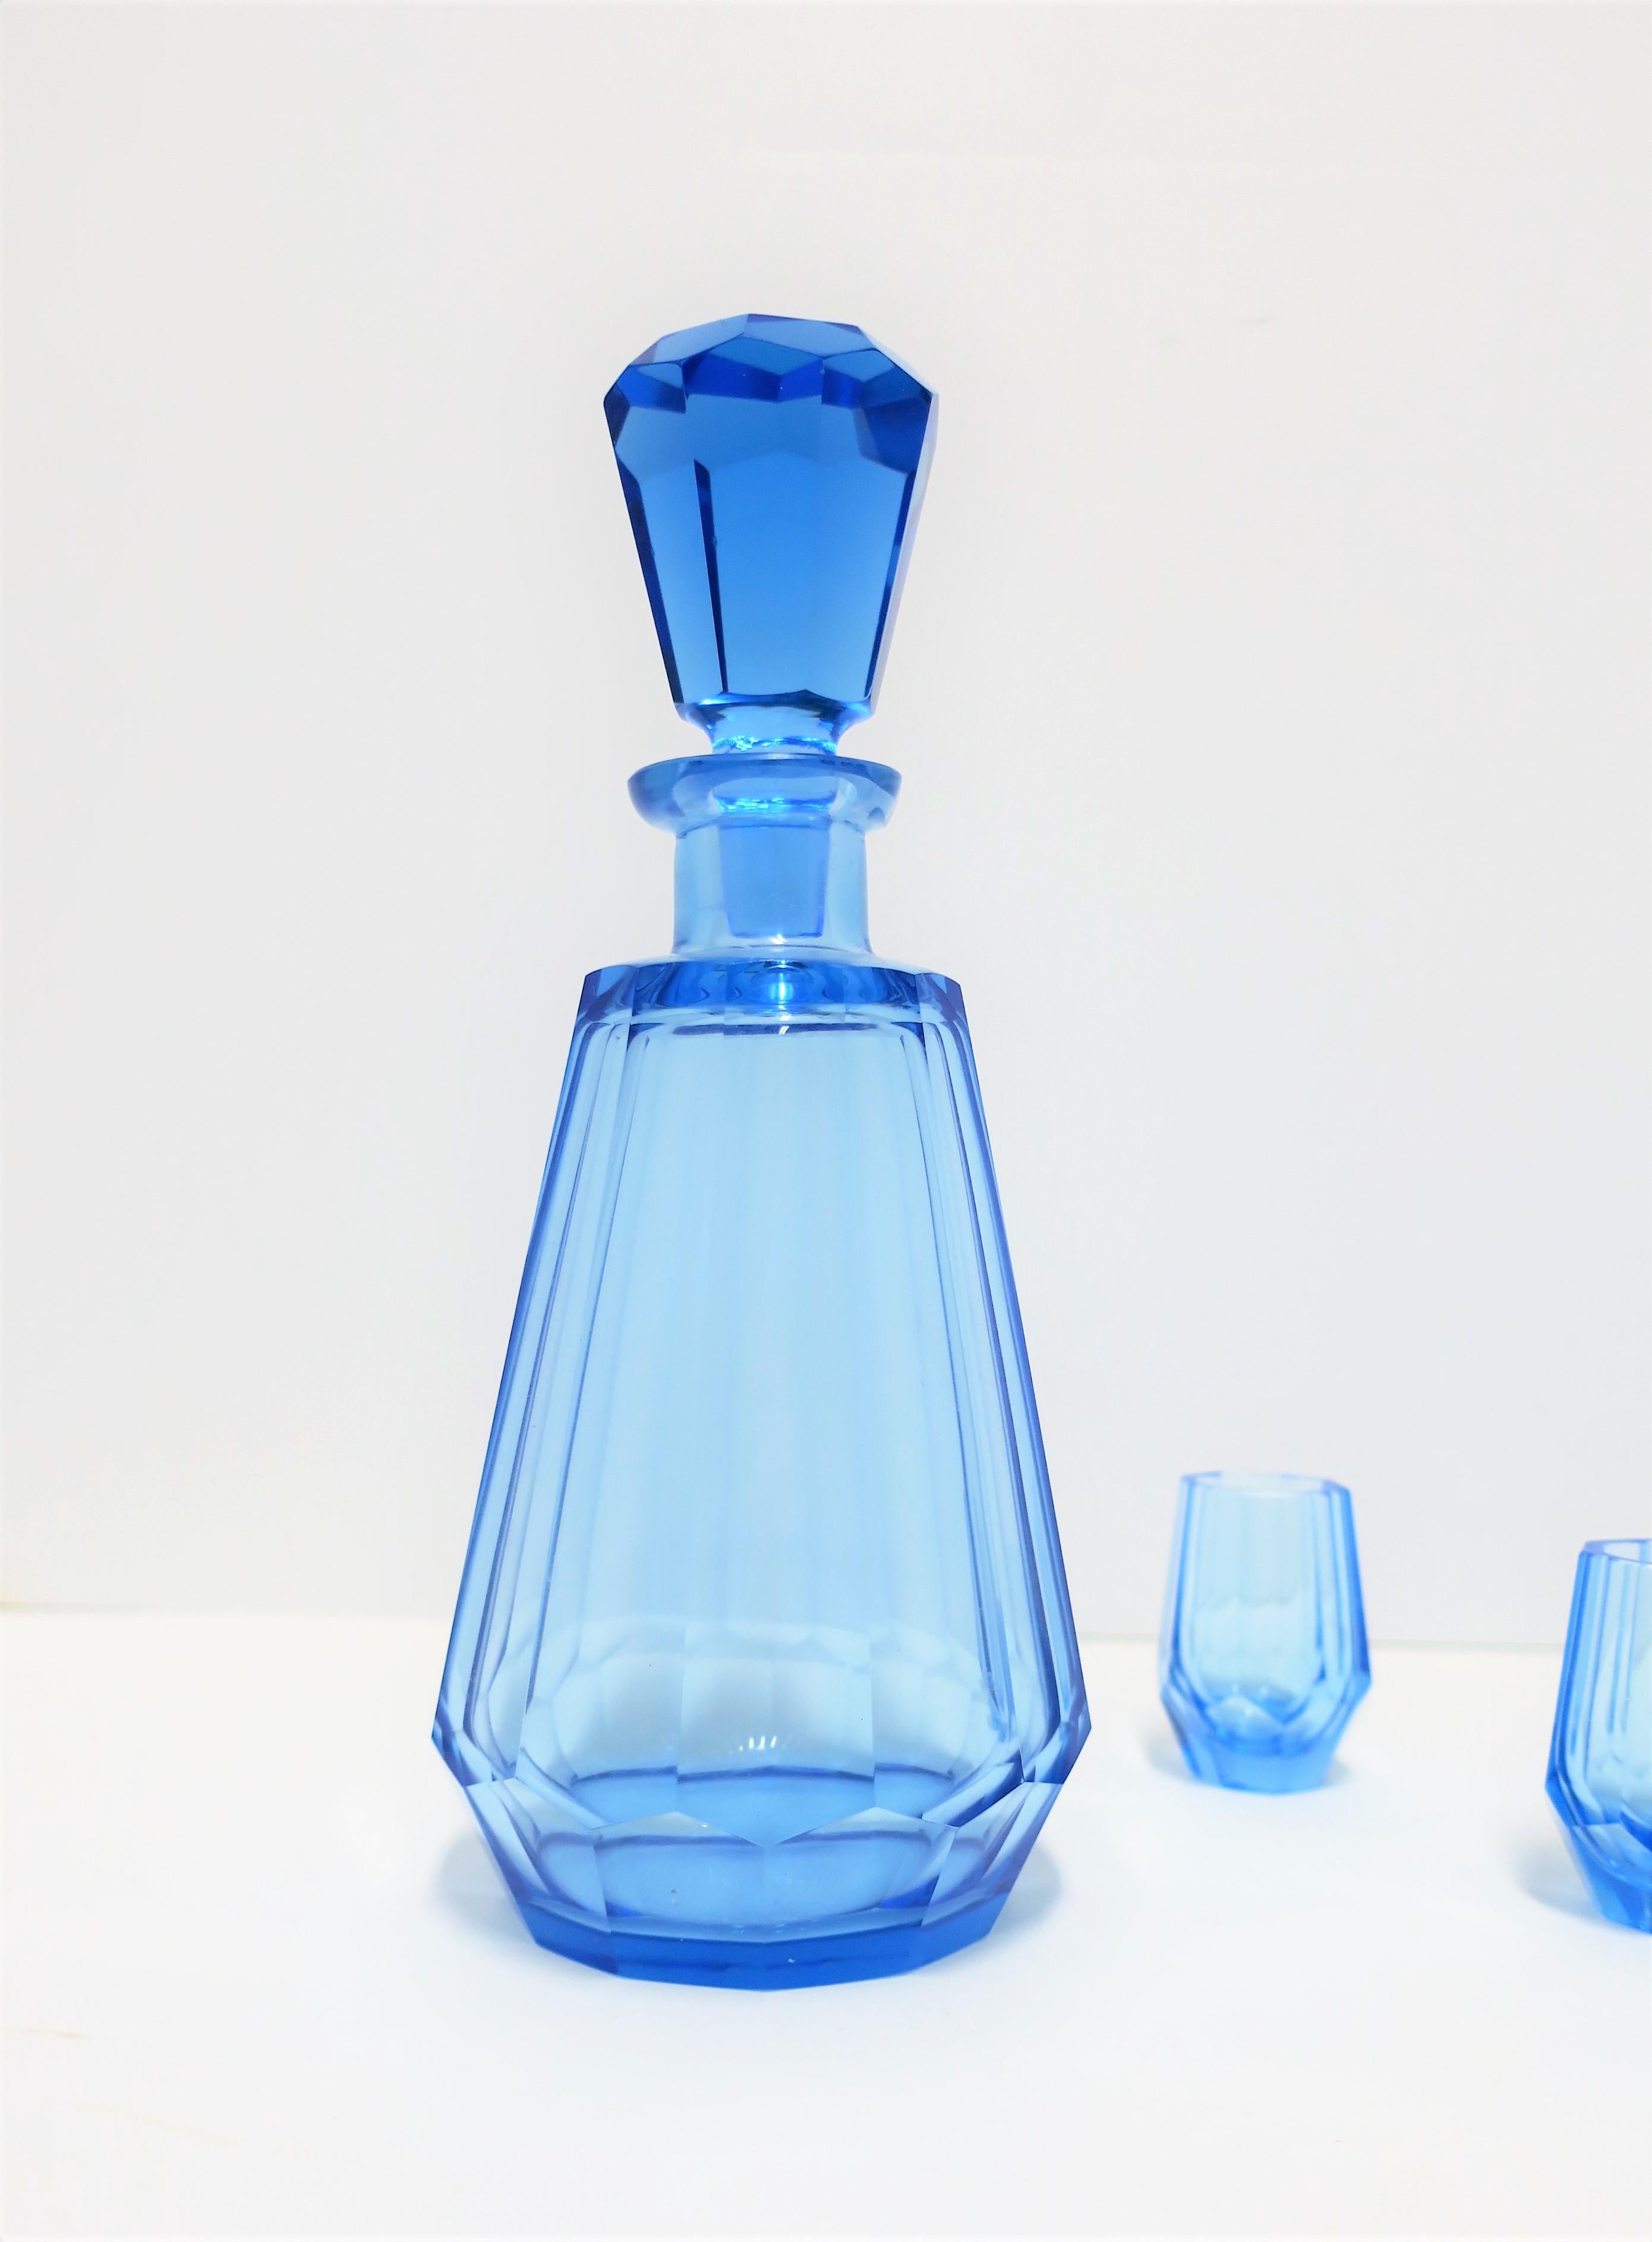 European Blue Crystal Liquor or Spirits Decanter and Glasses after Moser 6